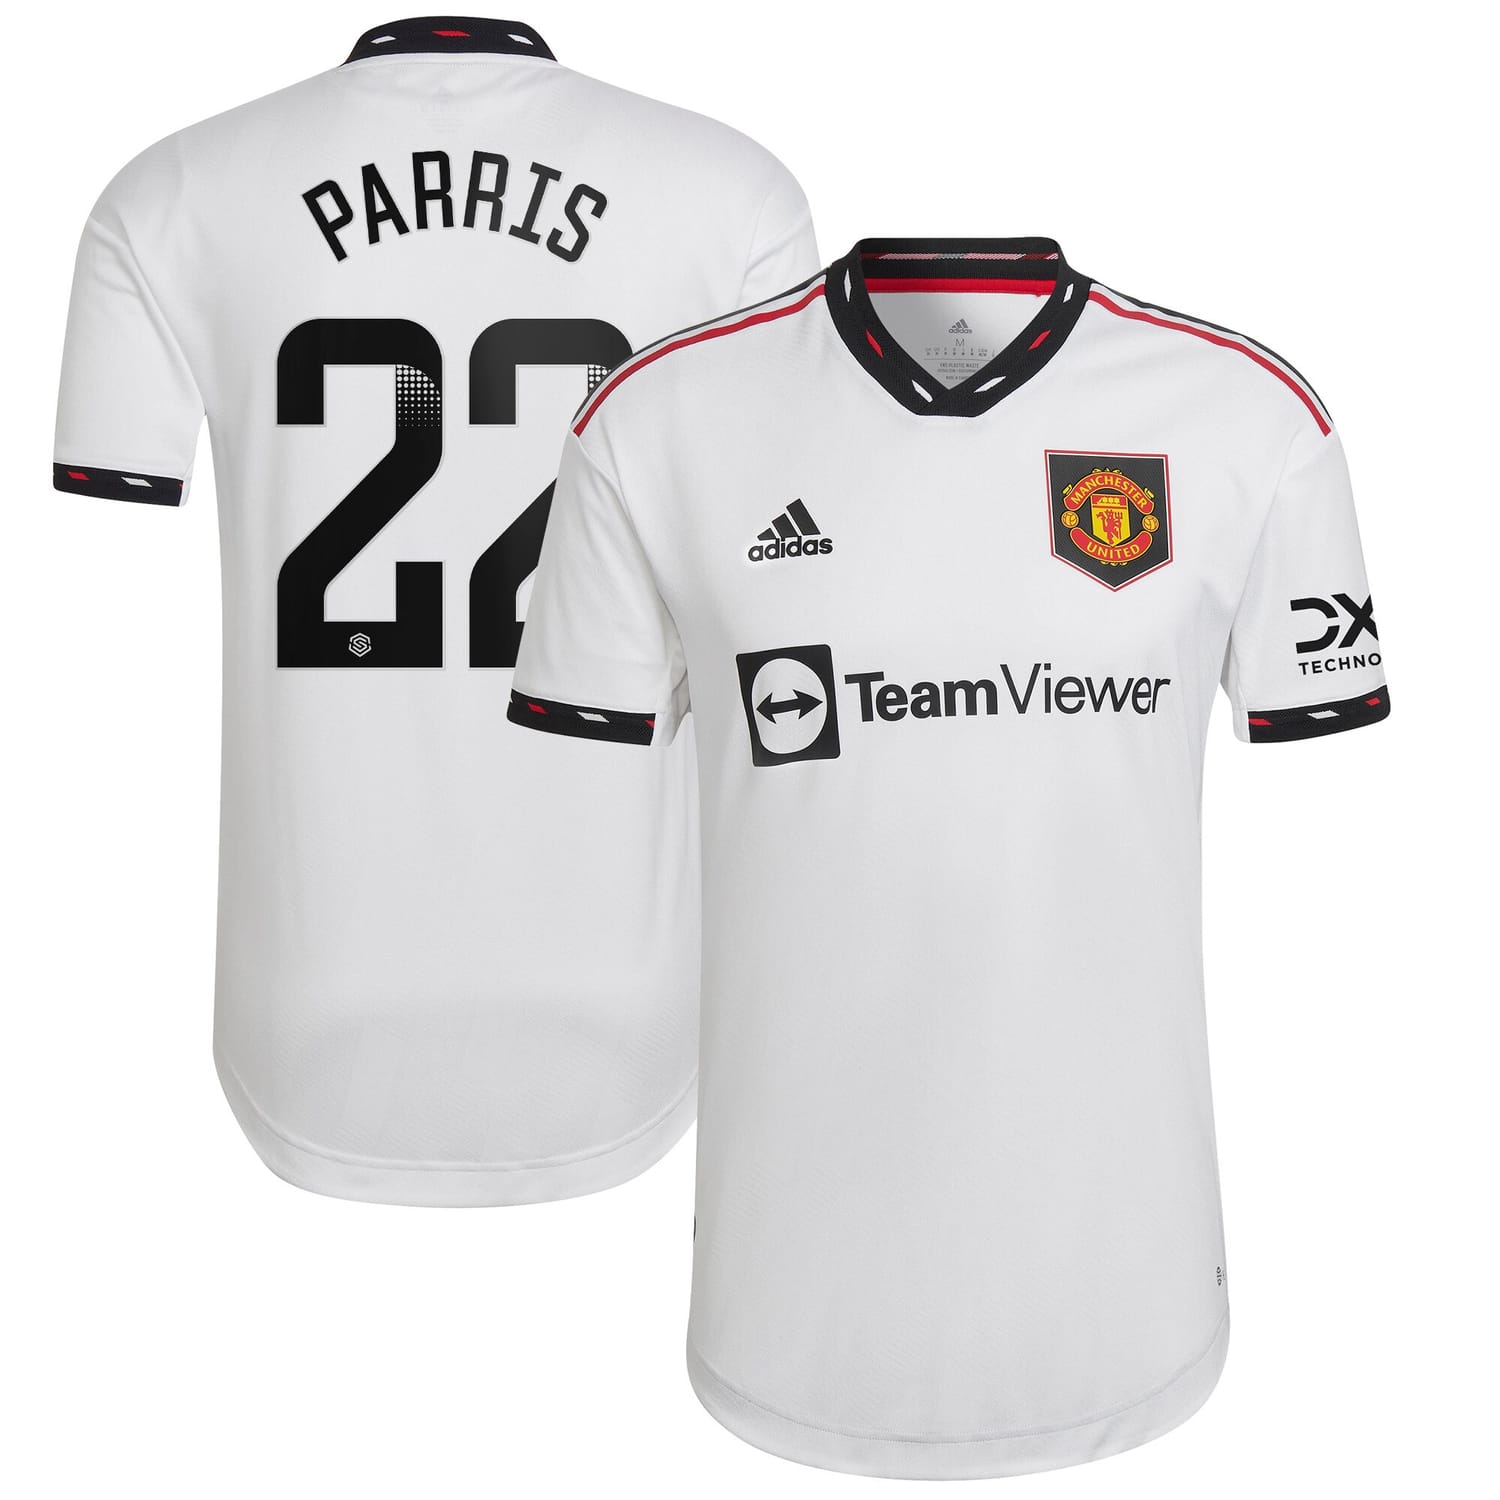 Premier League Manchester United Away WSL Authentic Jersey Shirt 2022-23 player Nikita Parris 22 printing for Men